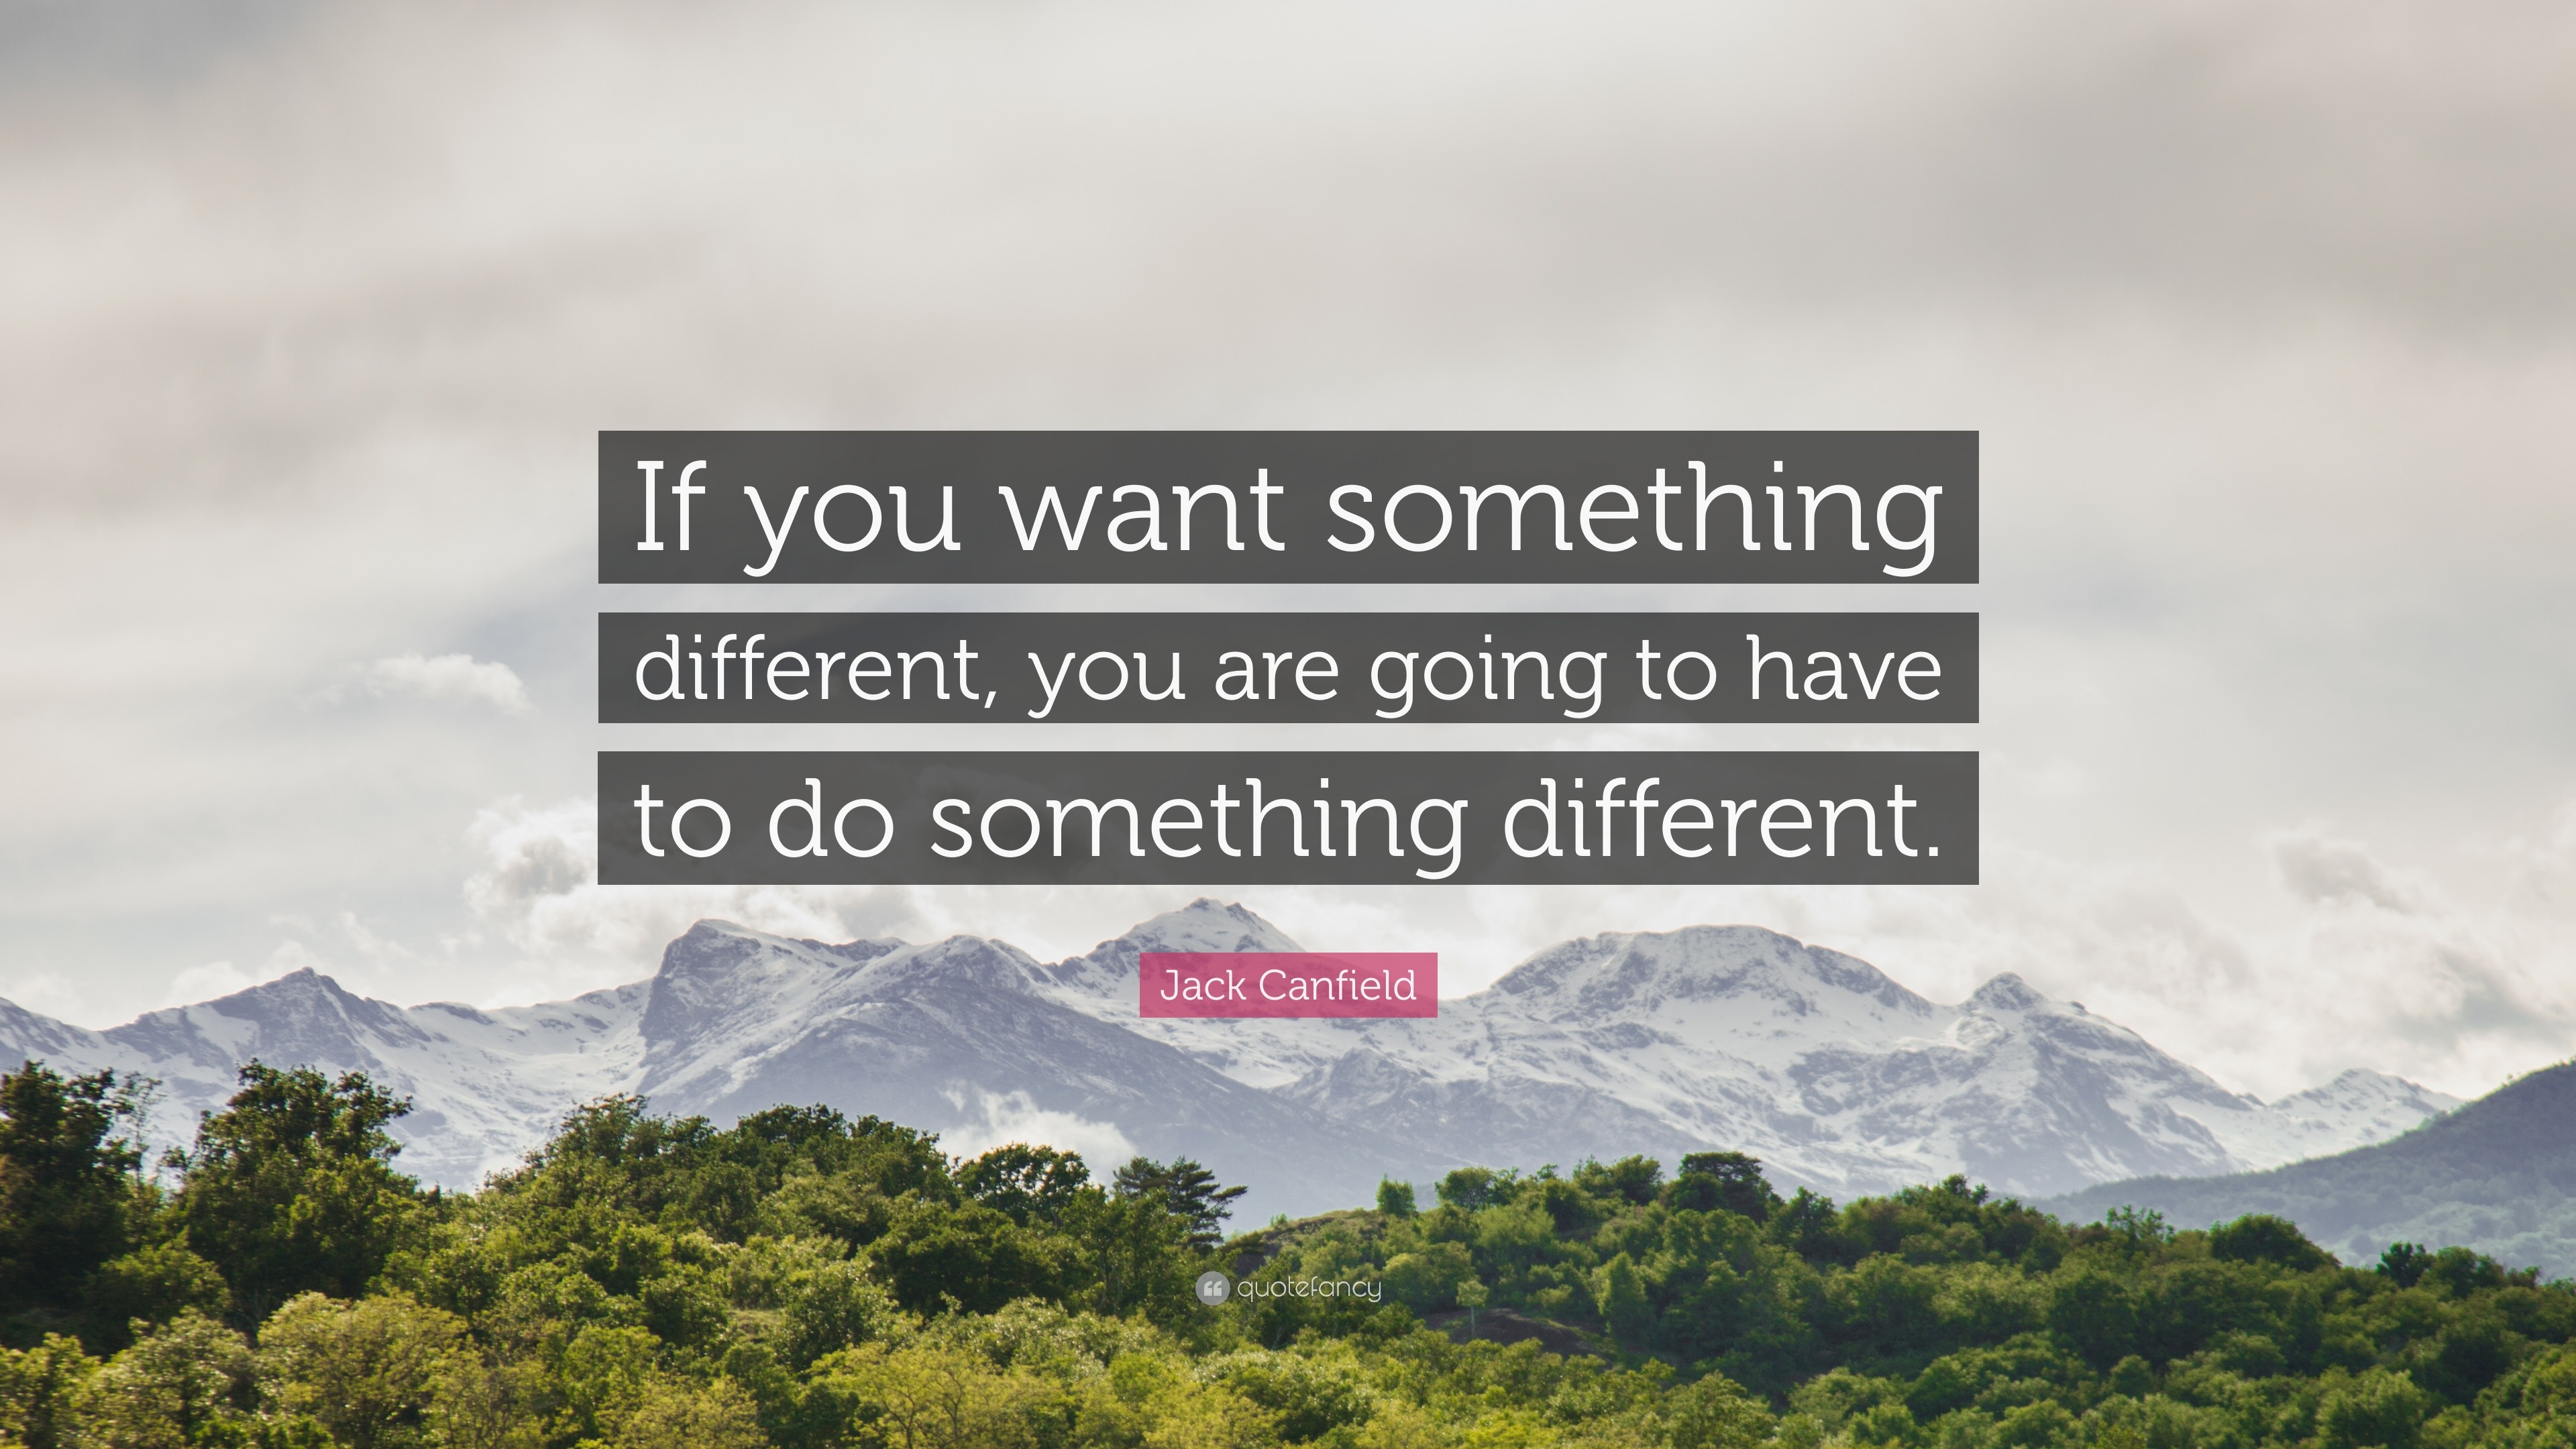 Jack Canfield Quote: “If you want something different, you are going to  have to do something